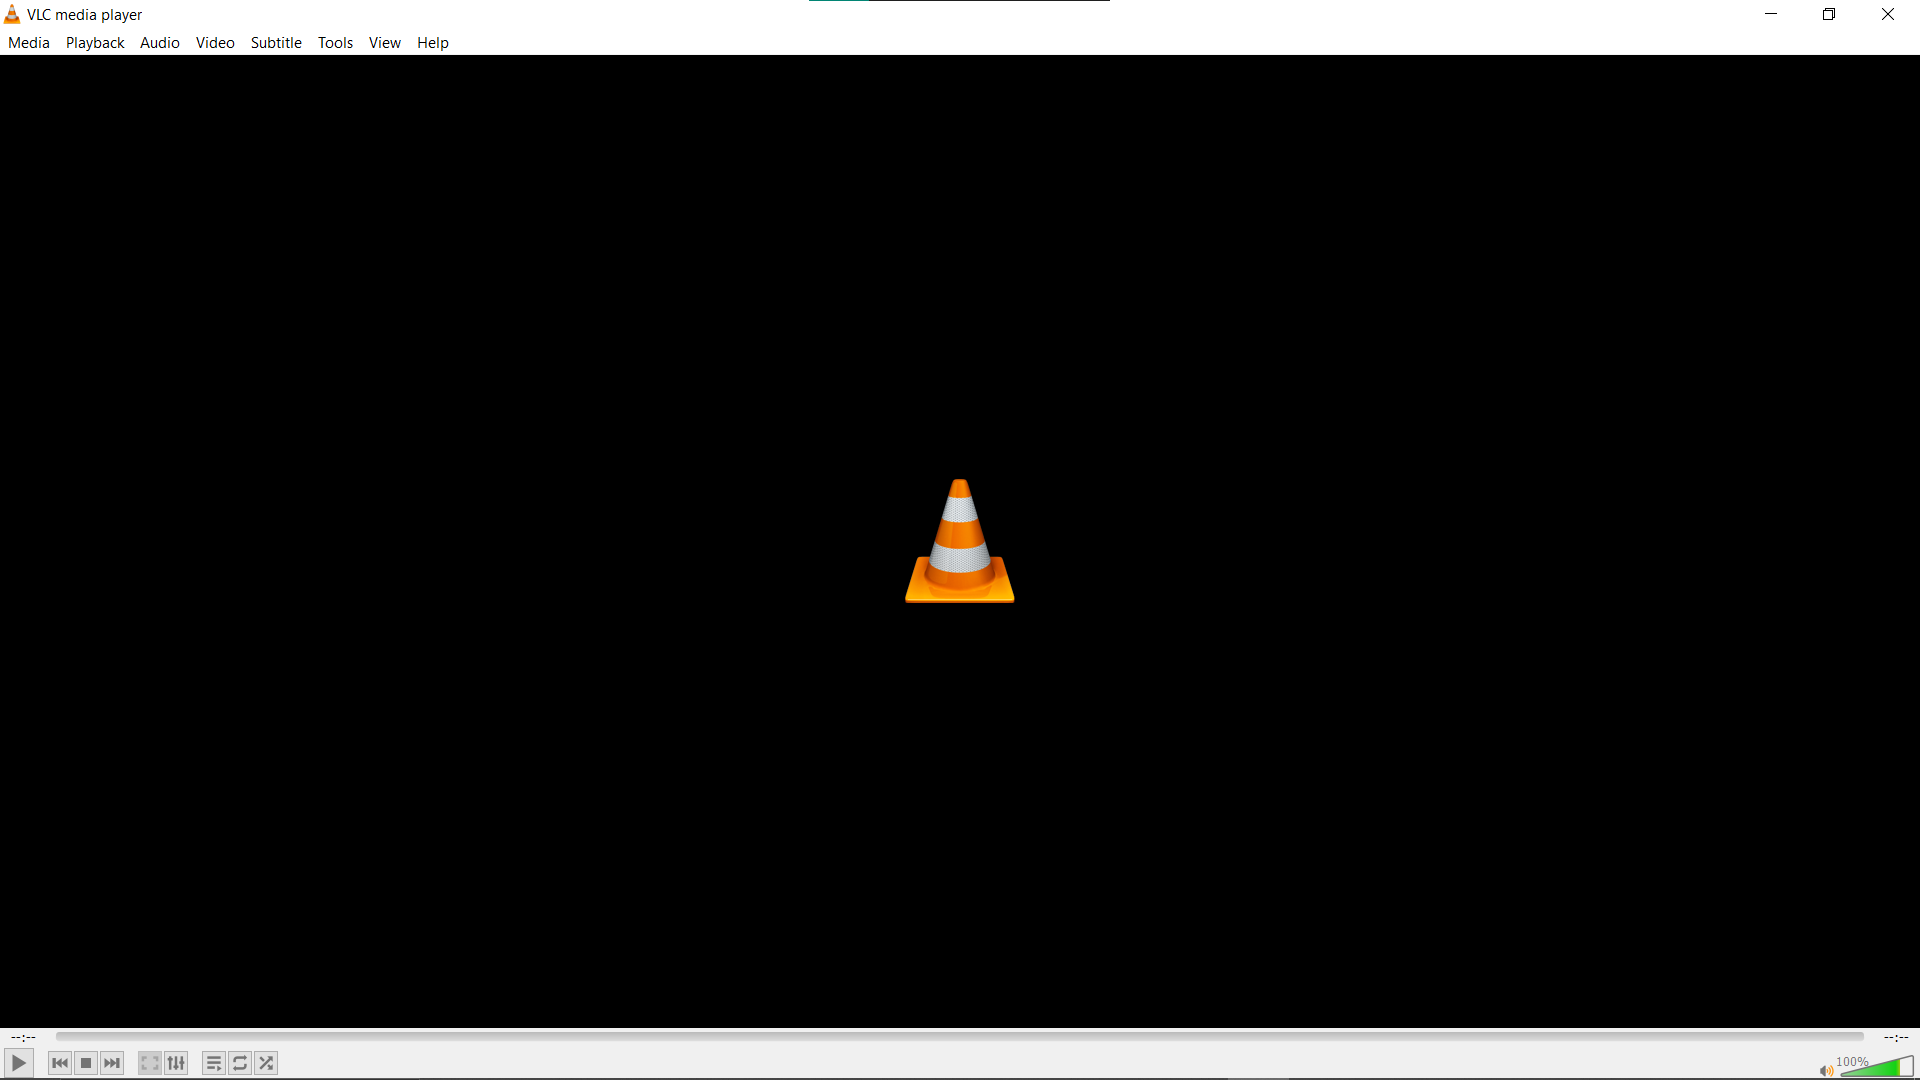 How To Use VLC for Compression: Step 1